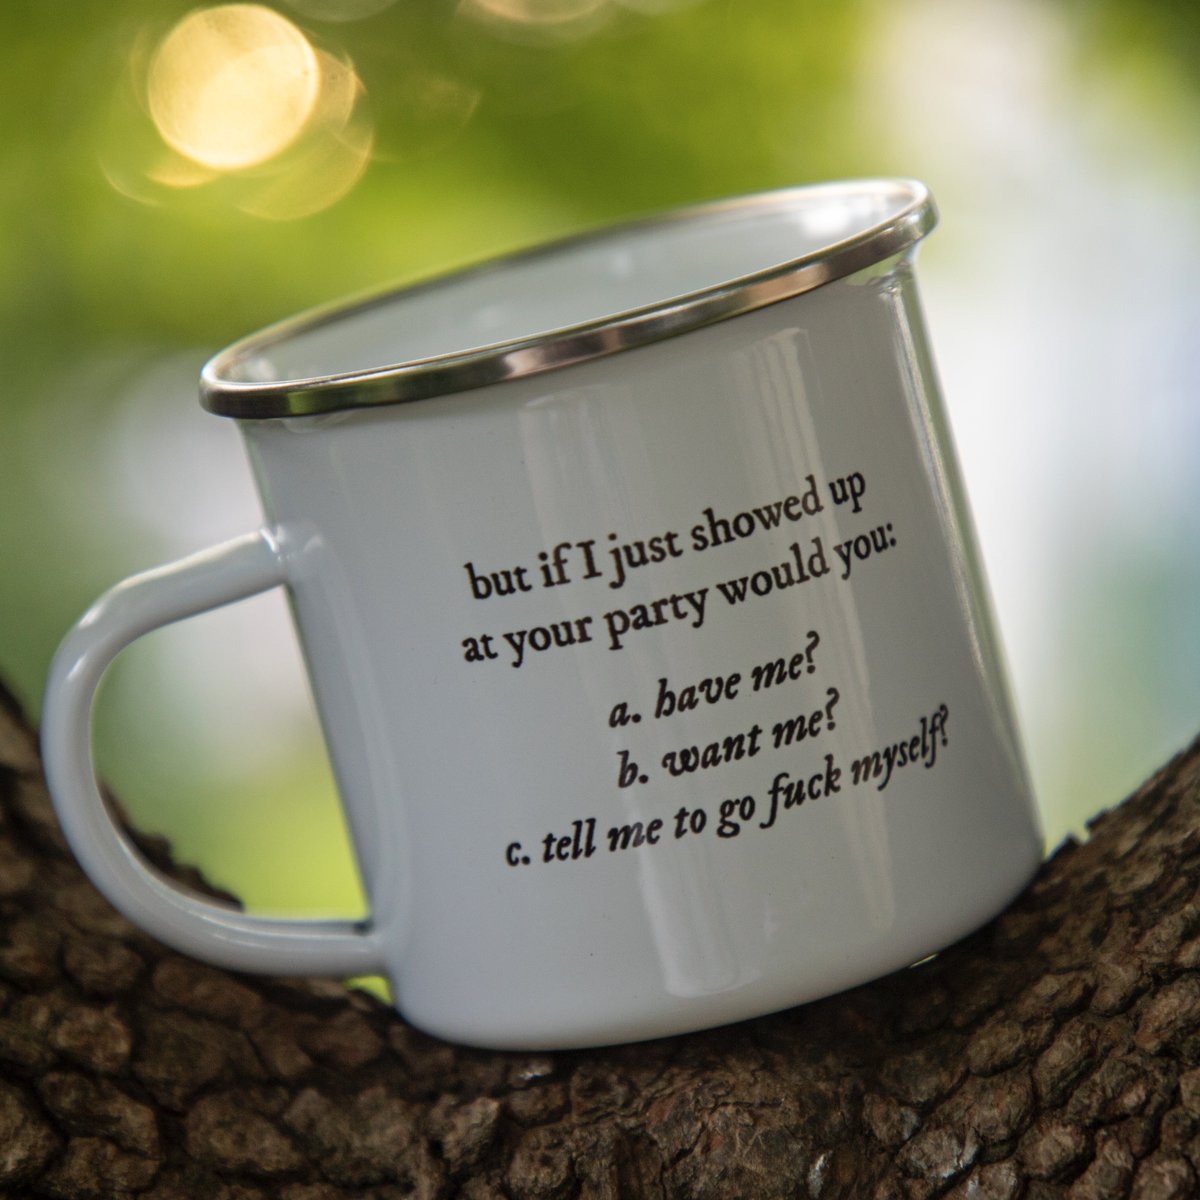 My shop is  http://1327andco.etsy.com  or  http://1327co.com  — I do have two Taylor related mugs. Other than that, my shop is filled with sarcastic and sassy drinkware (there is profanity on a lot of pieces), perfect for those with a twisted sense of humor!